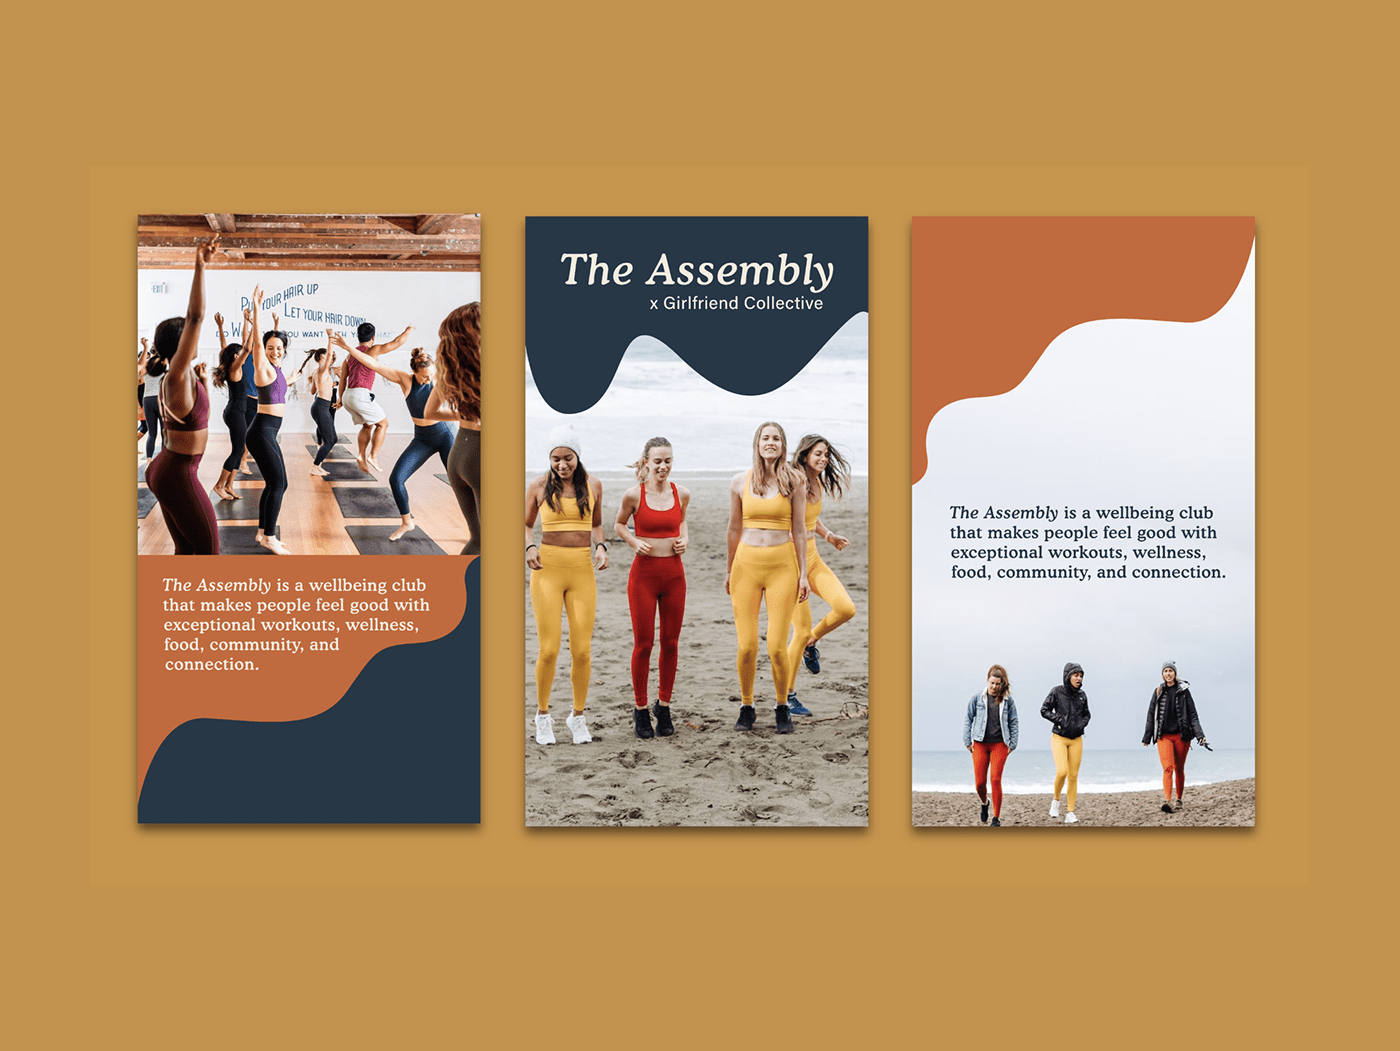 The Assembly san francisco feminism women's club women fitness co-working abstract design calendar